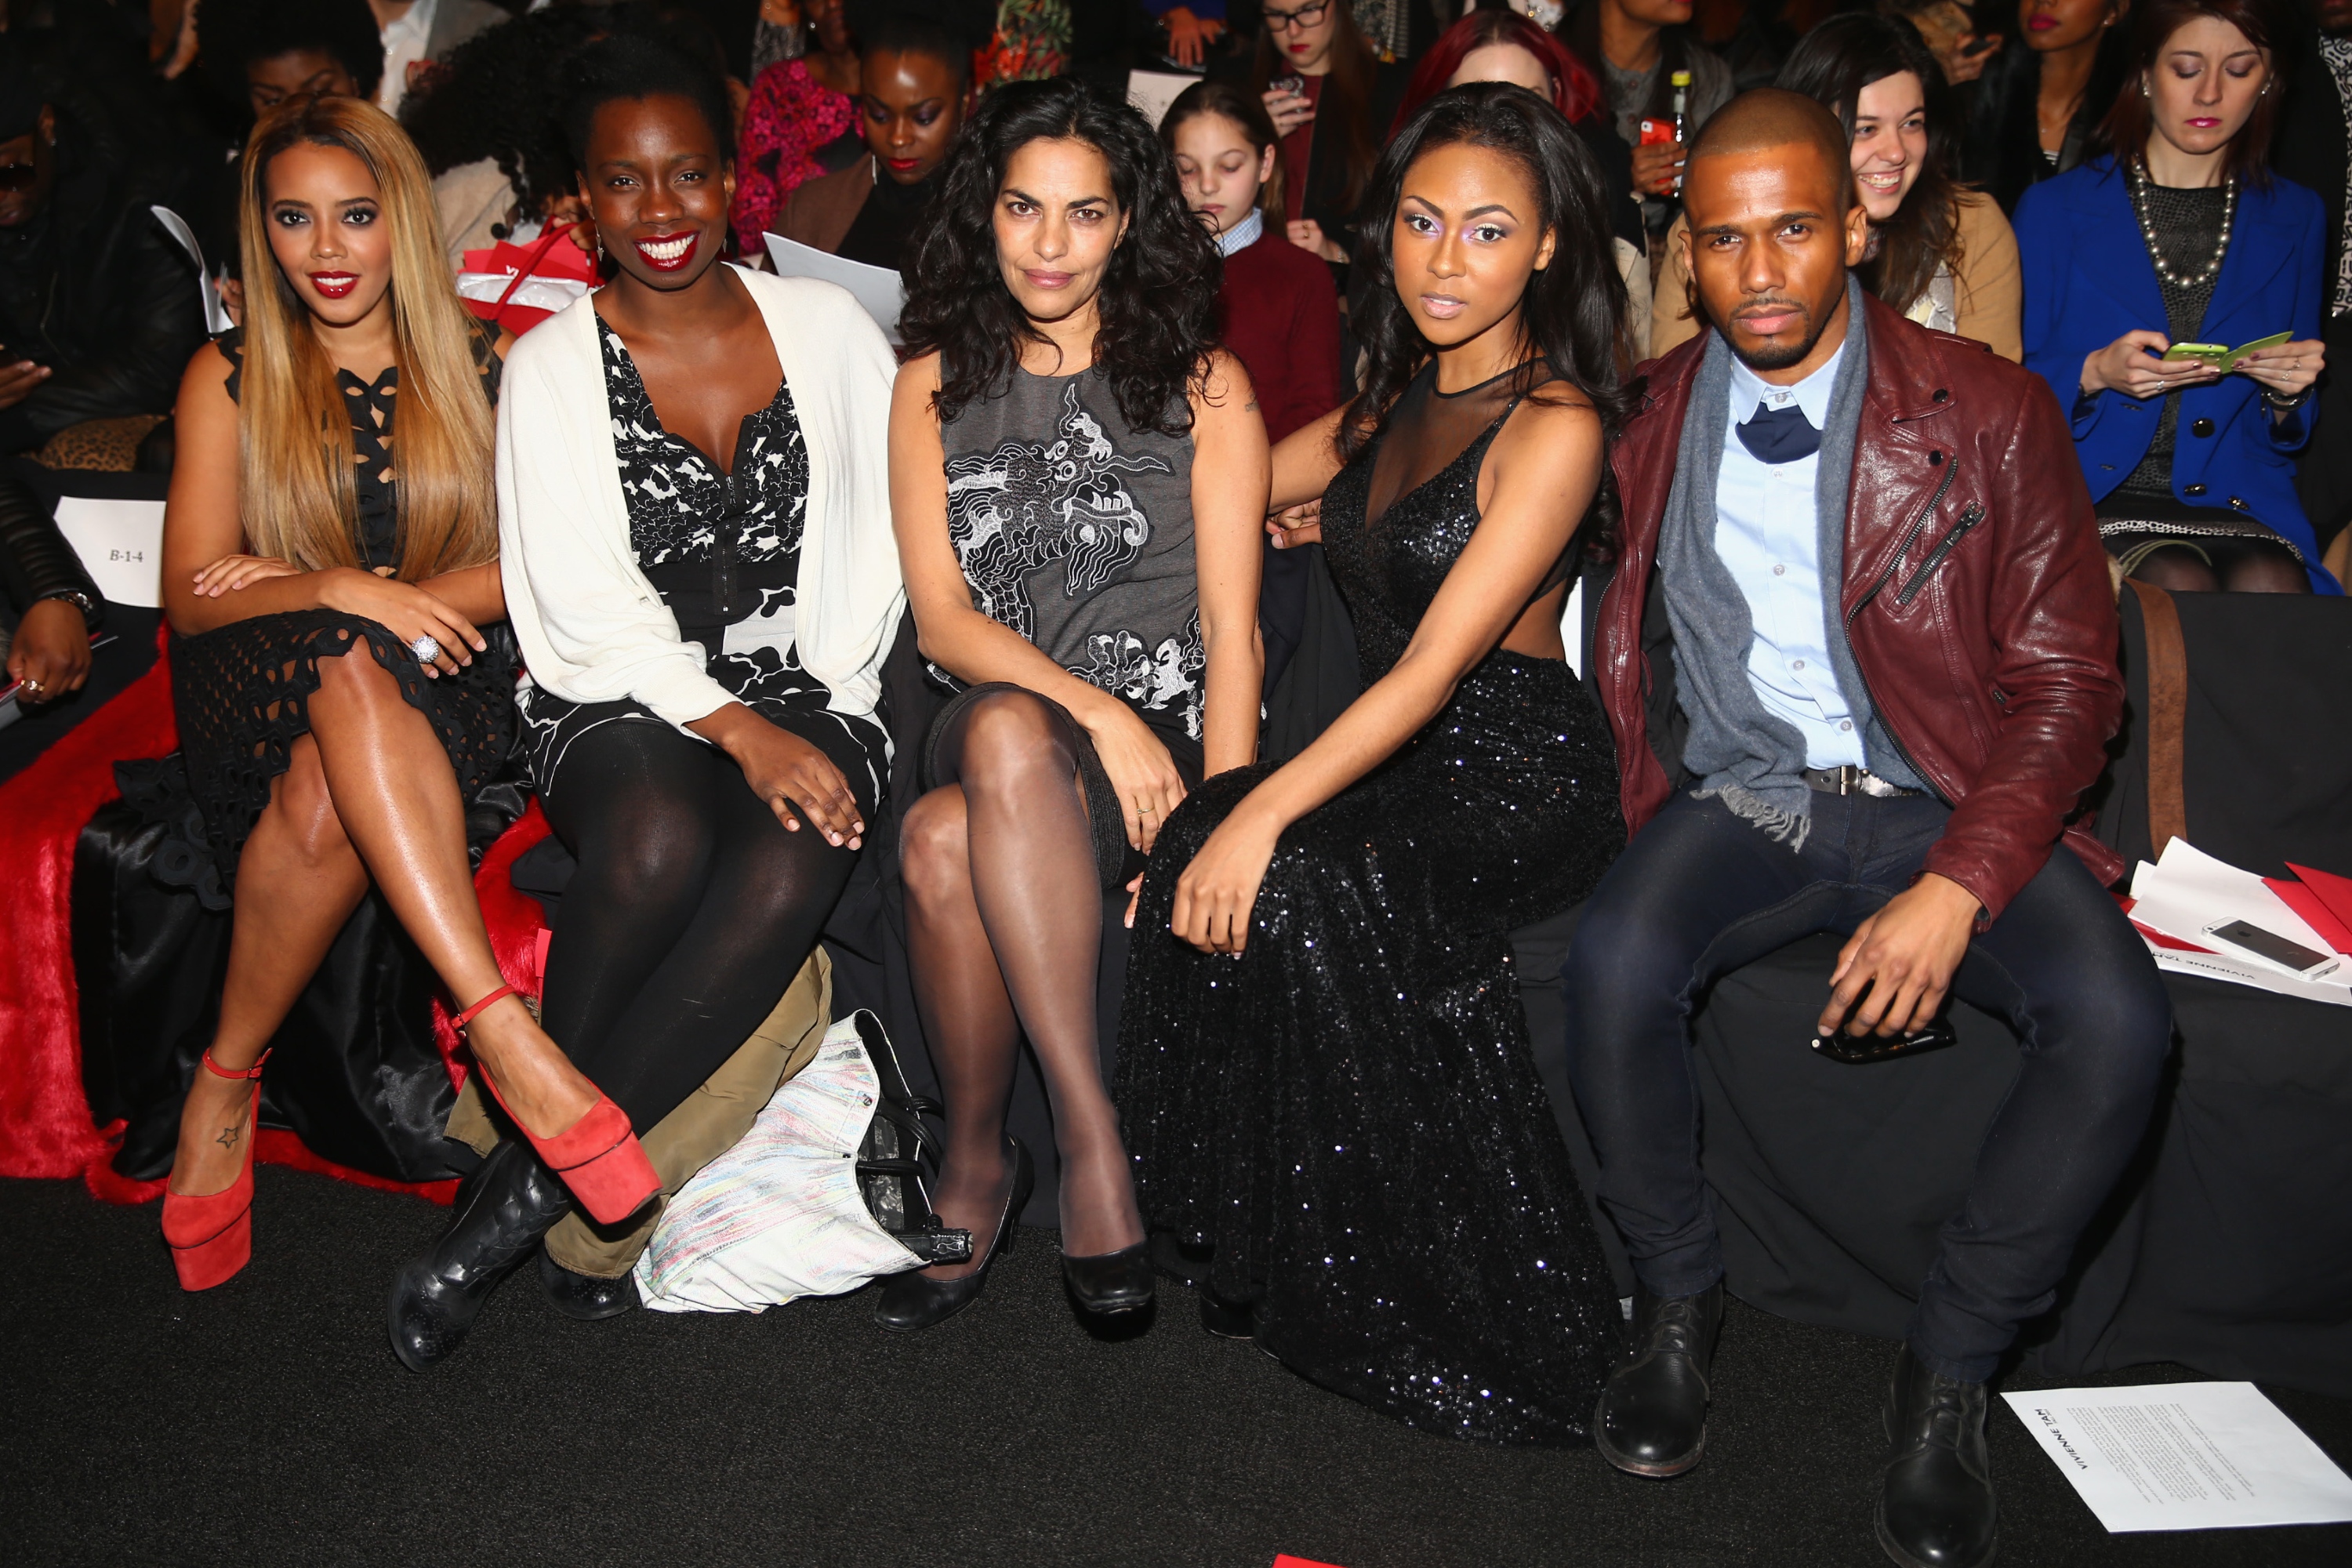 Actors Angela Simmons, Adepero Oduye, Sarita Choudhury, Tashiana Washington and Eric West attend the Vivienne Tam fashion show with TRESemme during Mercedes-Benz Fashion Week Fall 2014 at The Theater at Lincoln Center on February 9, 2014 in New York City.